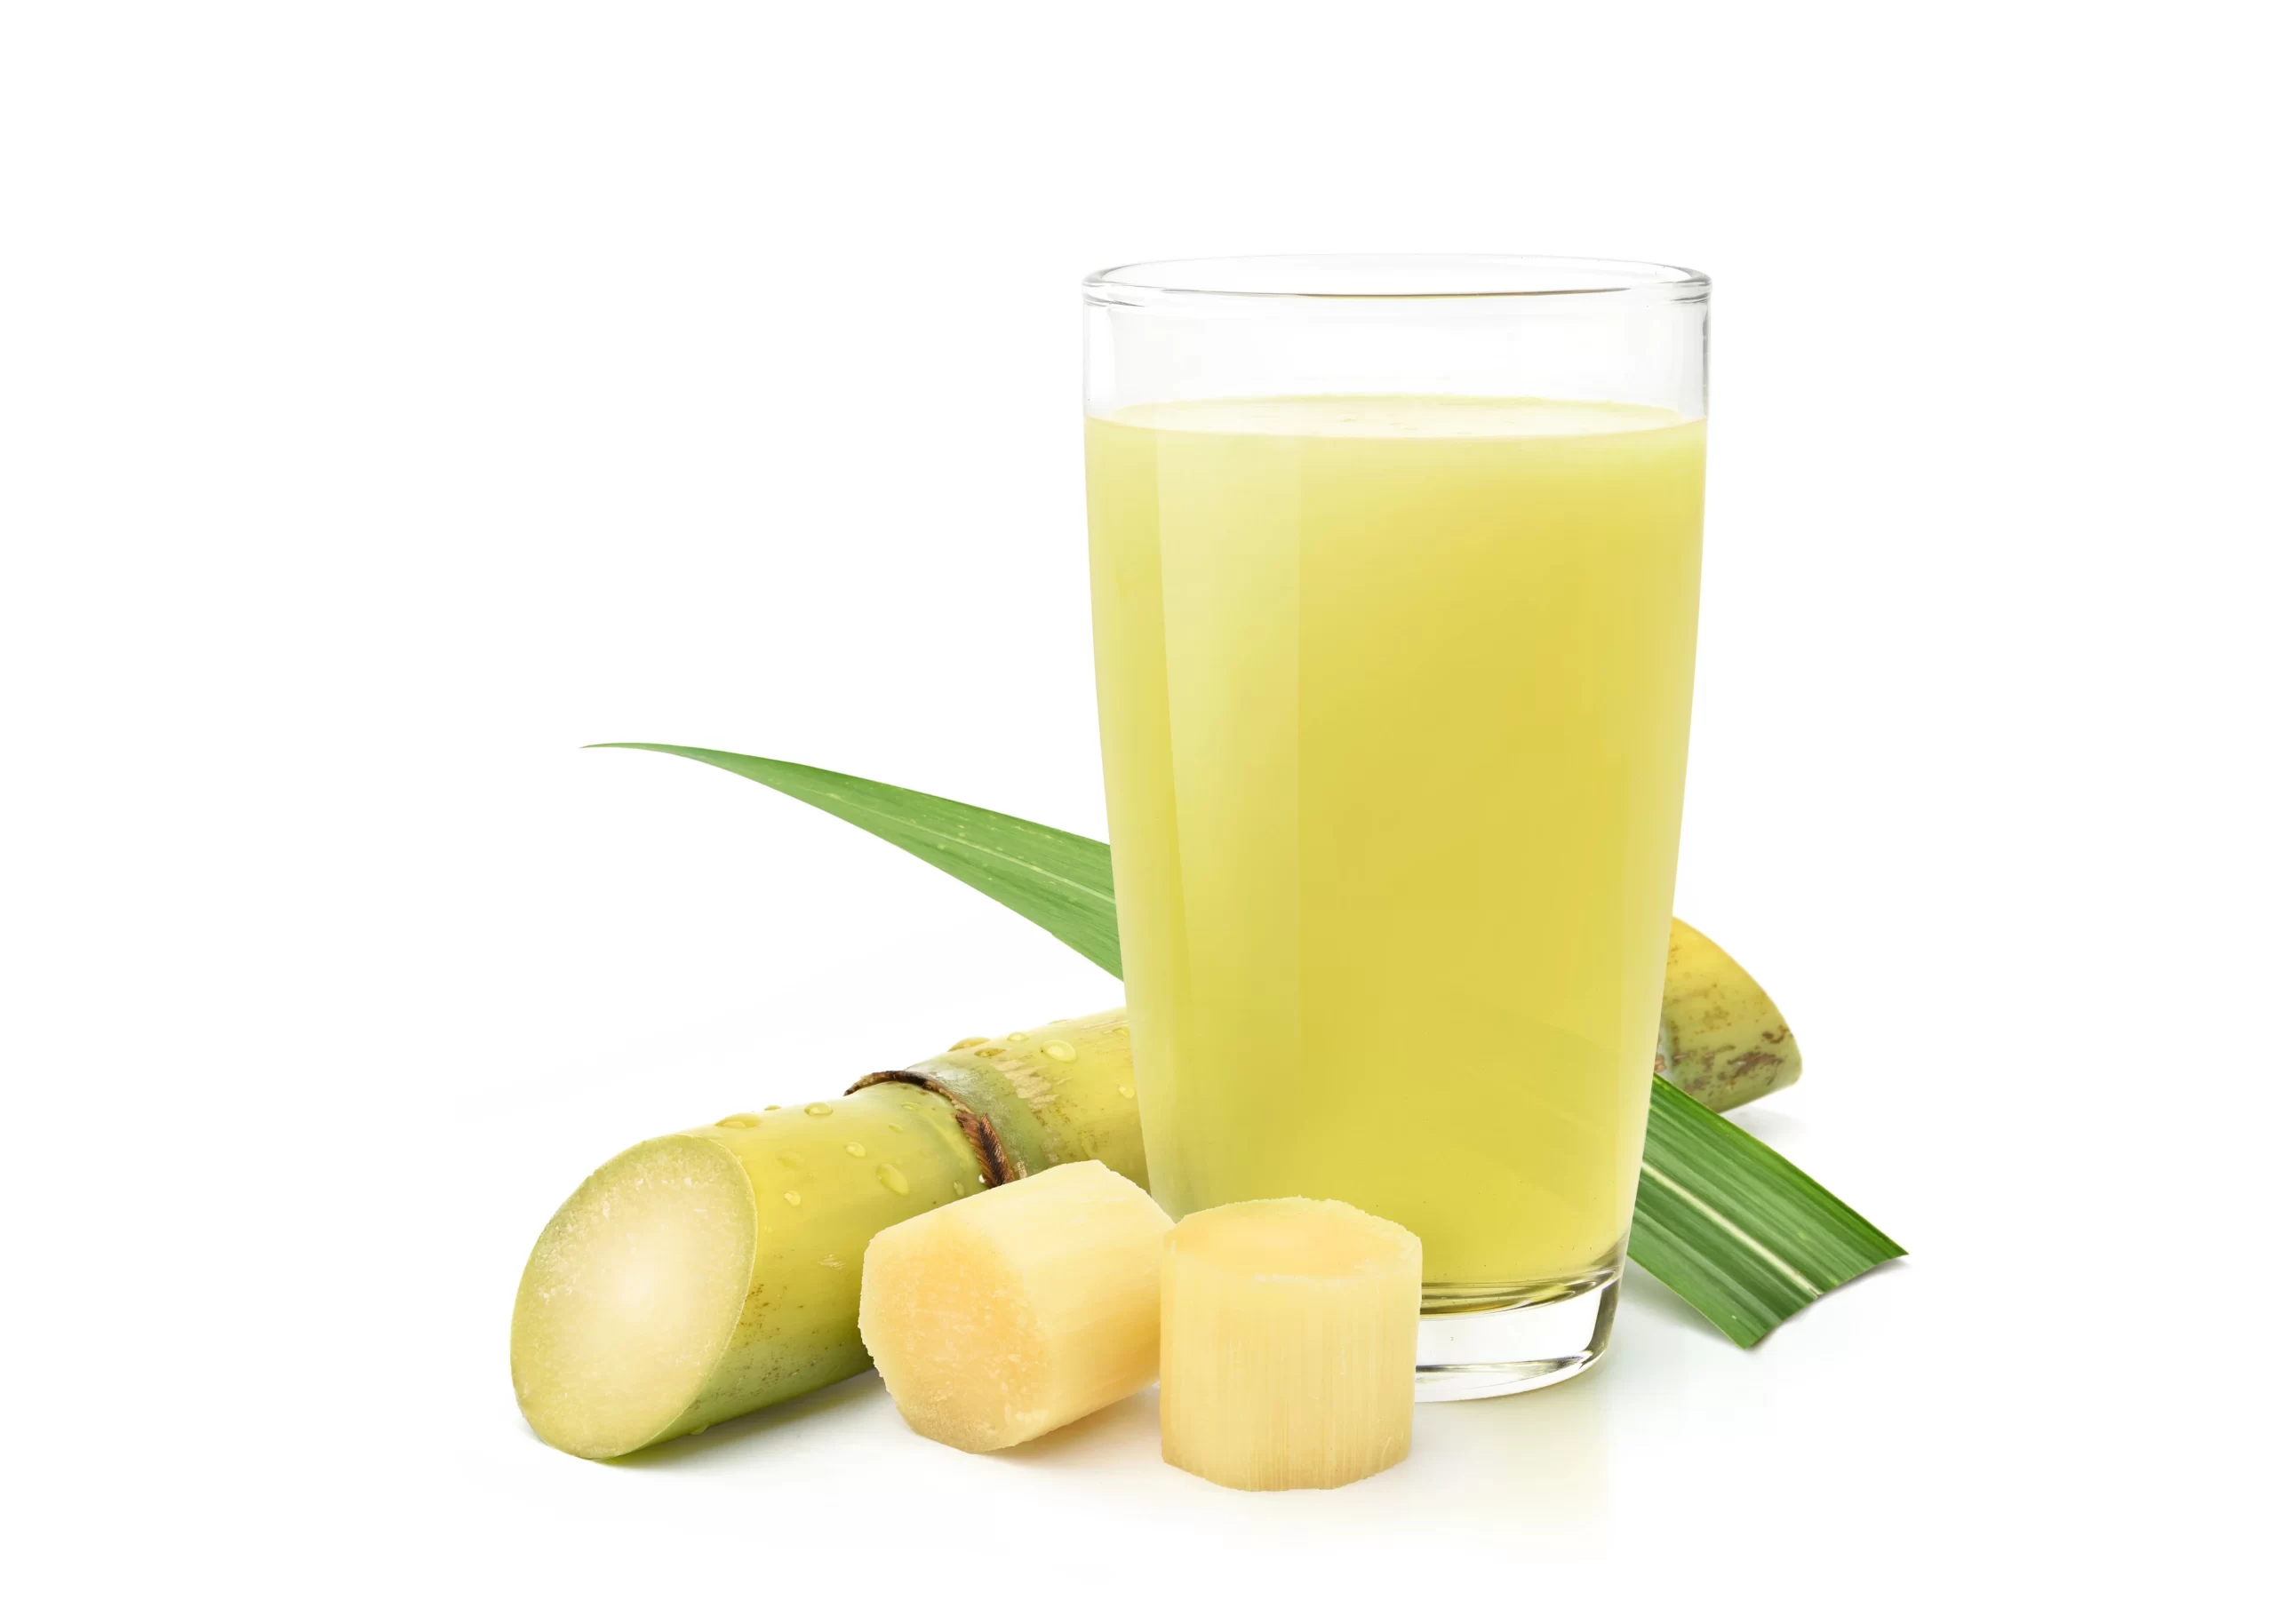 You are currently viewing Sugarcane juice for enhanced well-being.